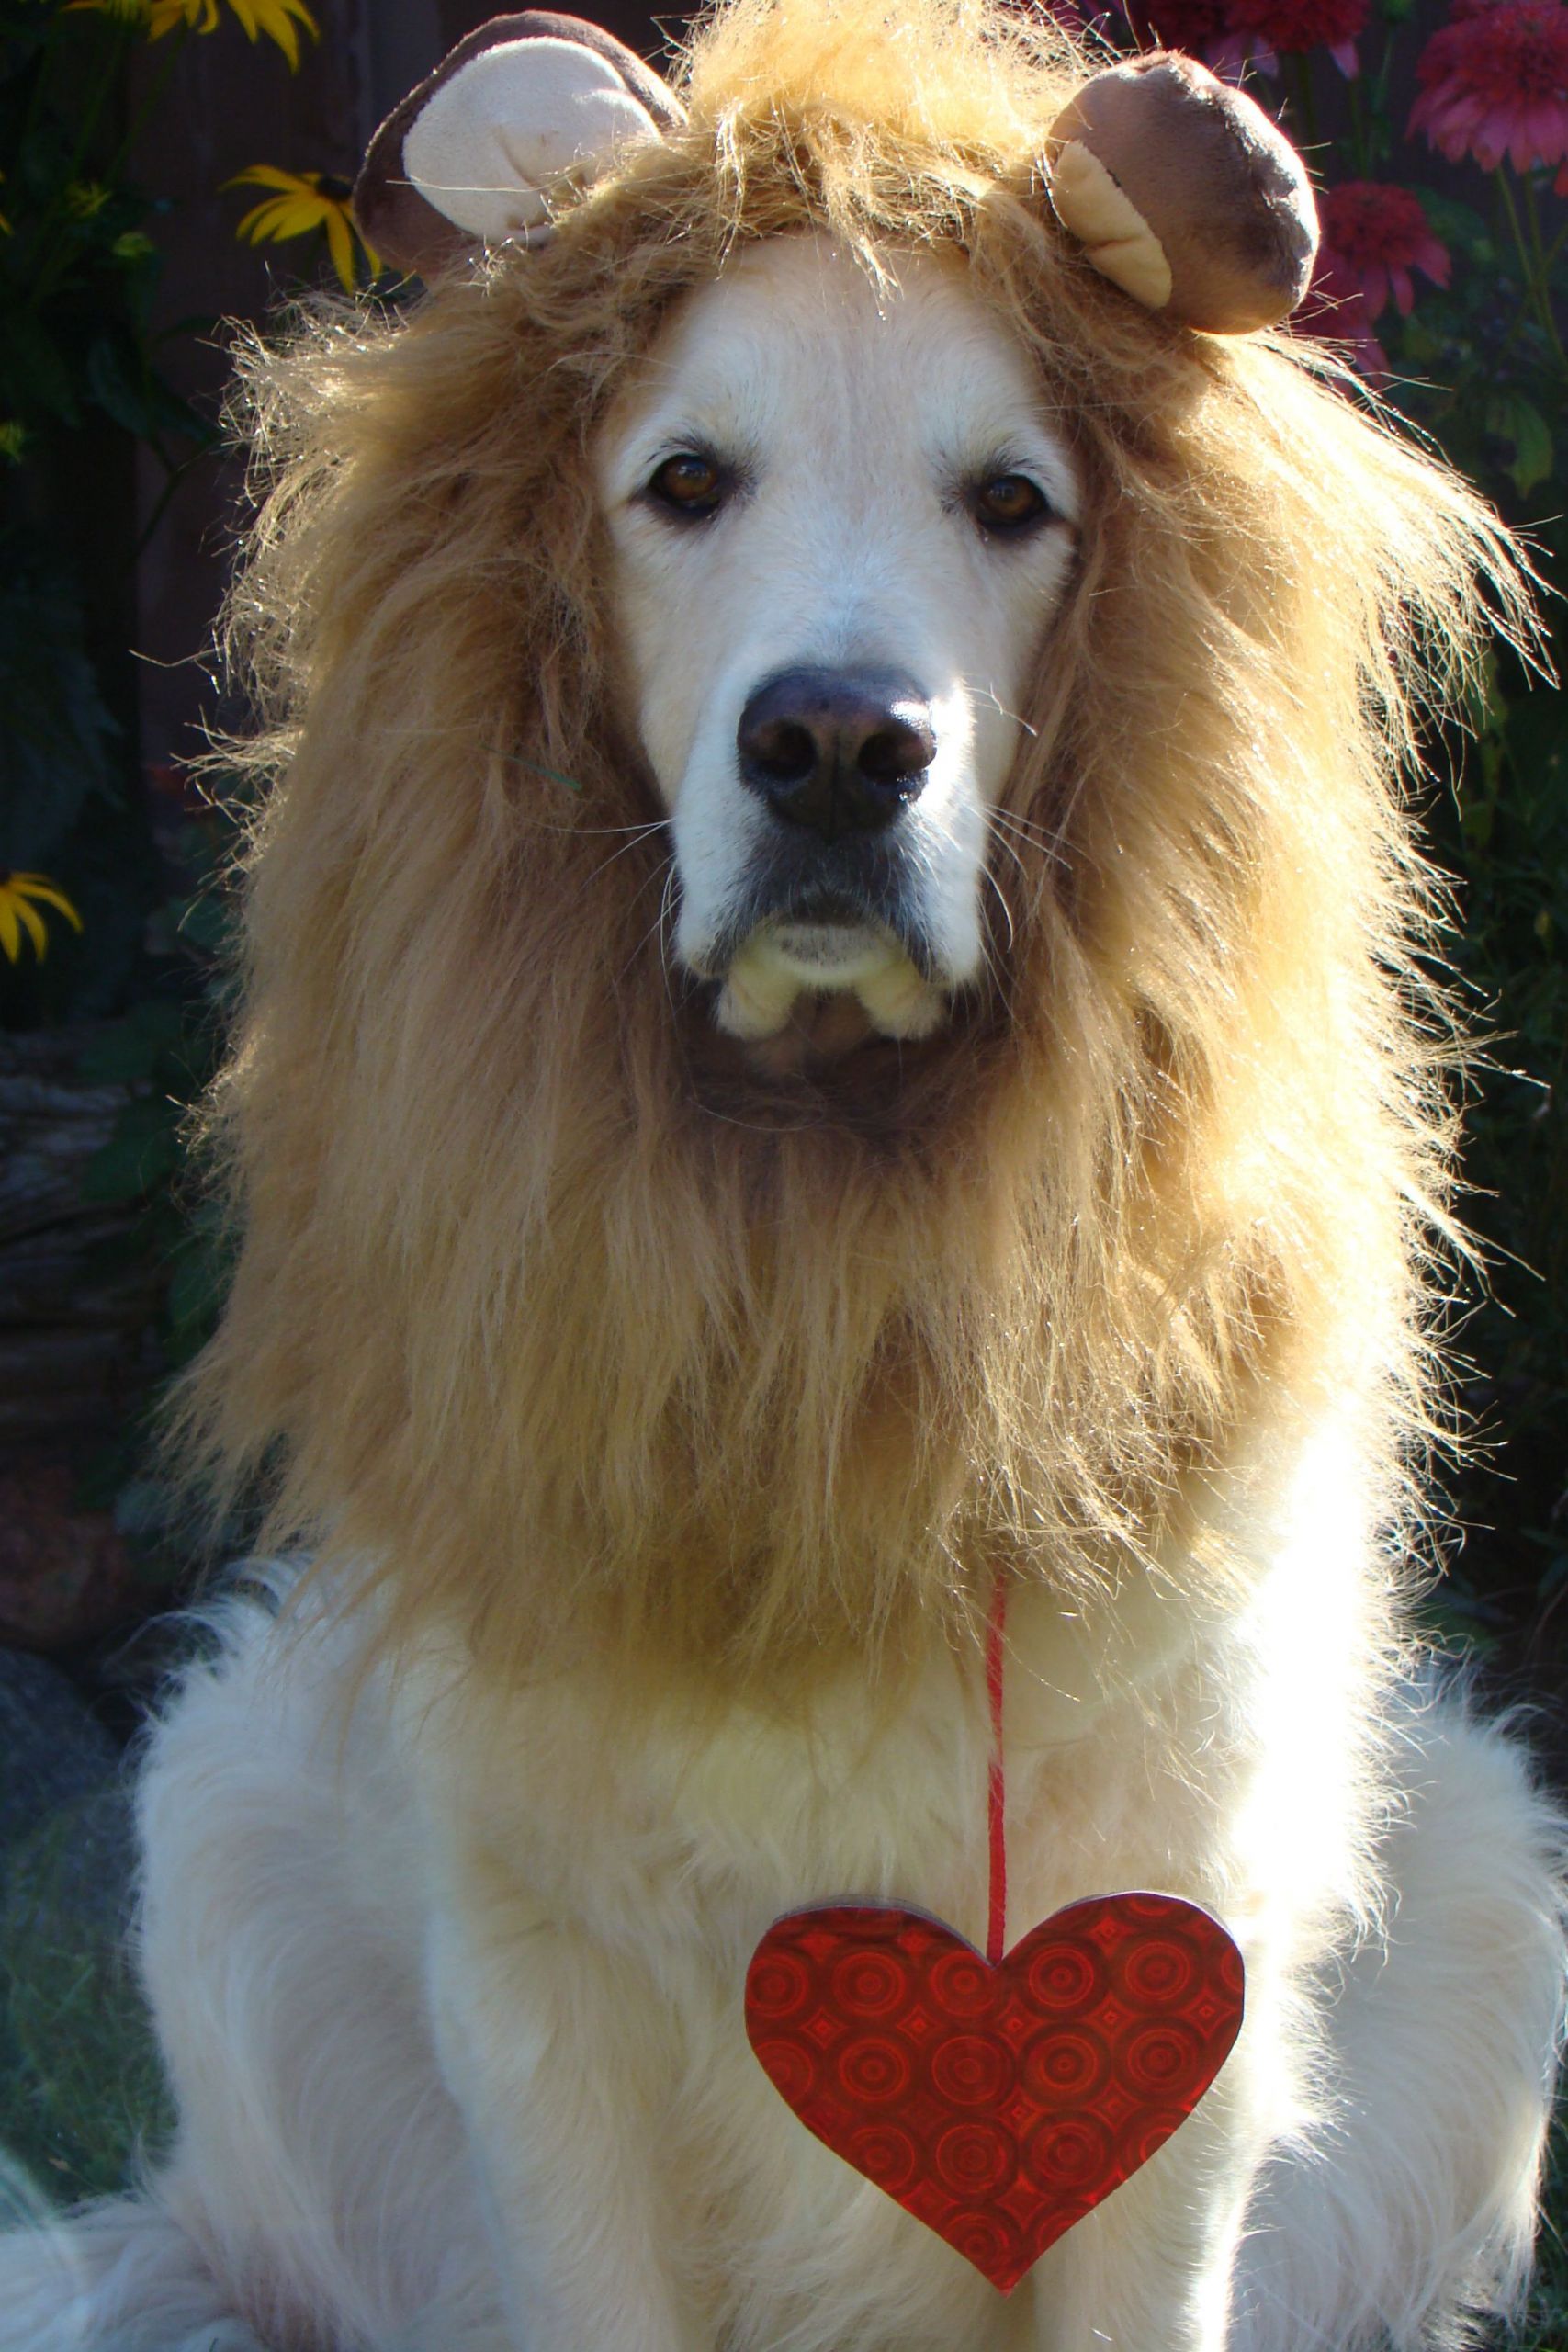 DIY Lion Costume For Dog
 Bentley posing as the cowardly lion from Wizard of Oz with